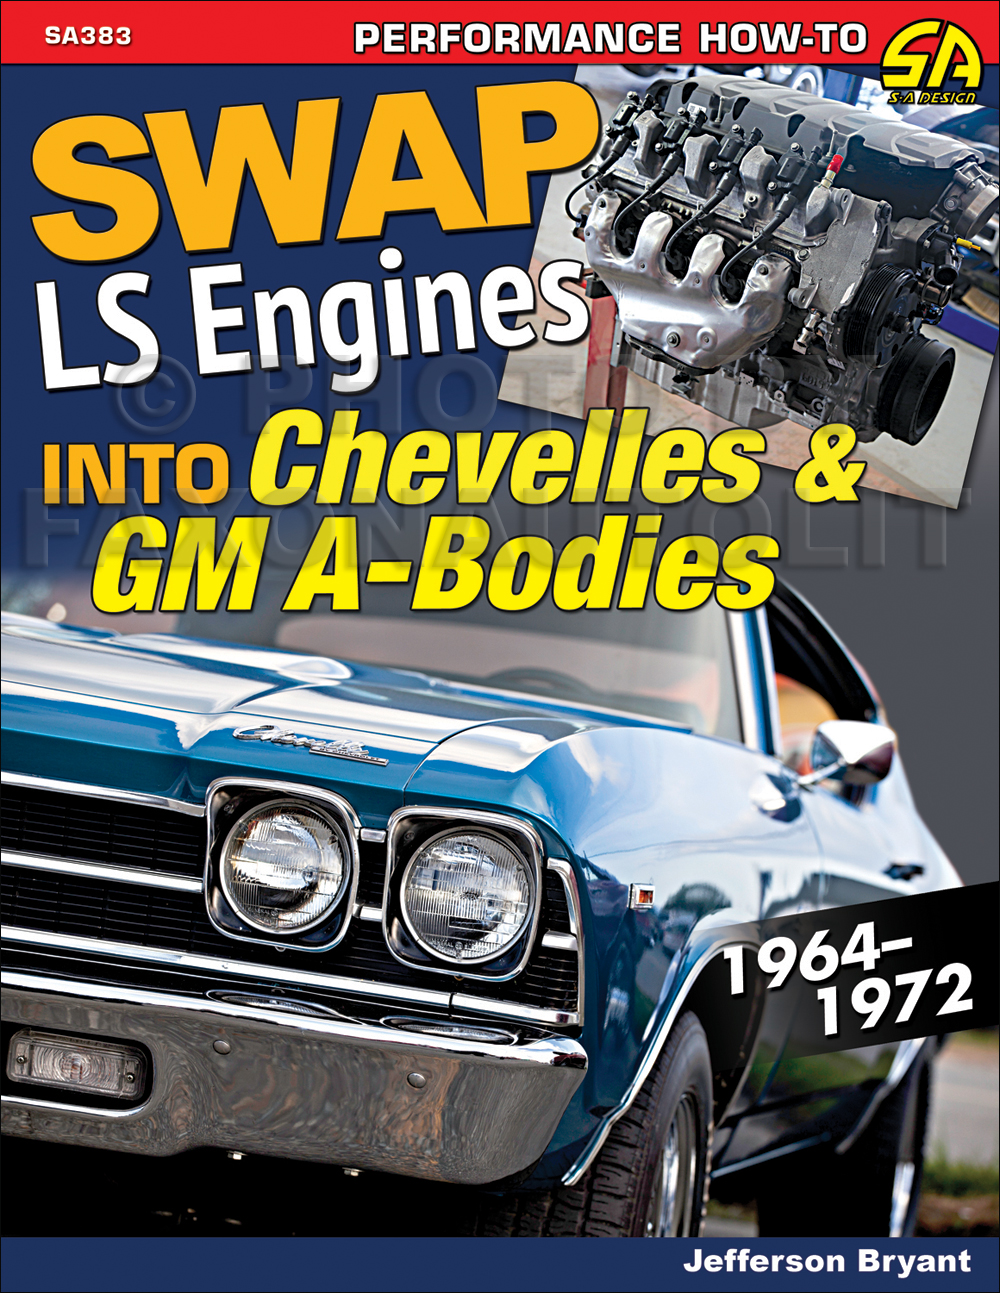 Swap GM LS Engines into 1964-1972 Chevelles & GM A-Bodies